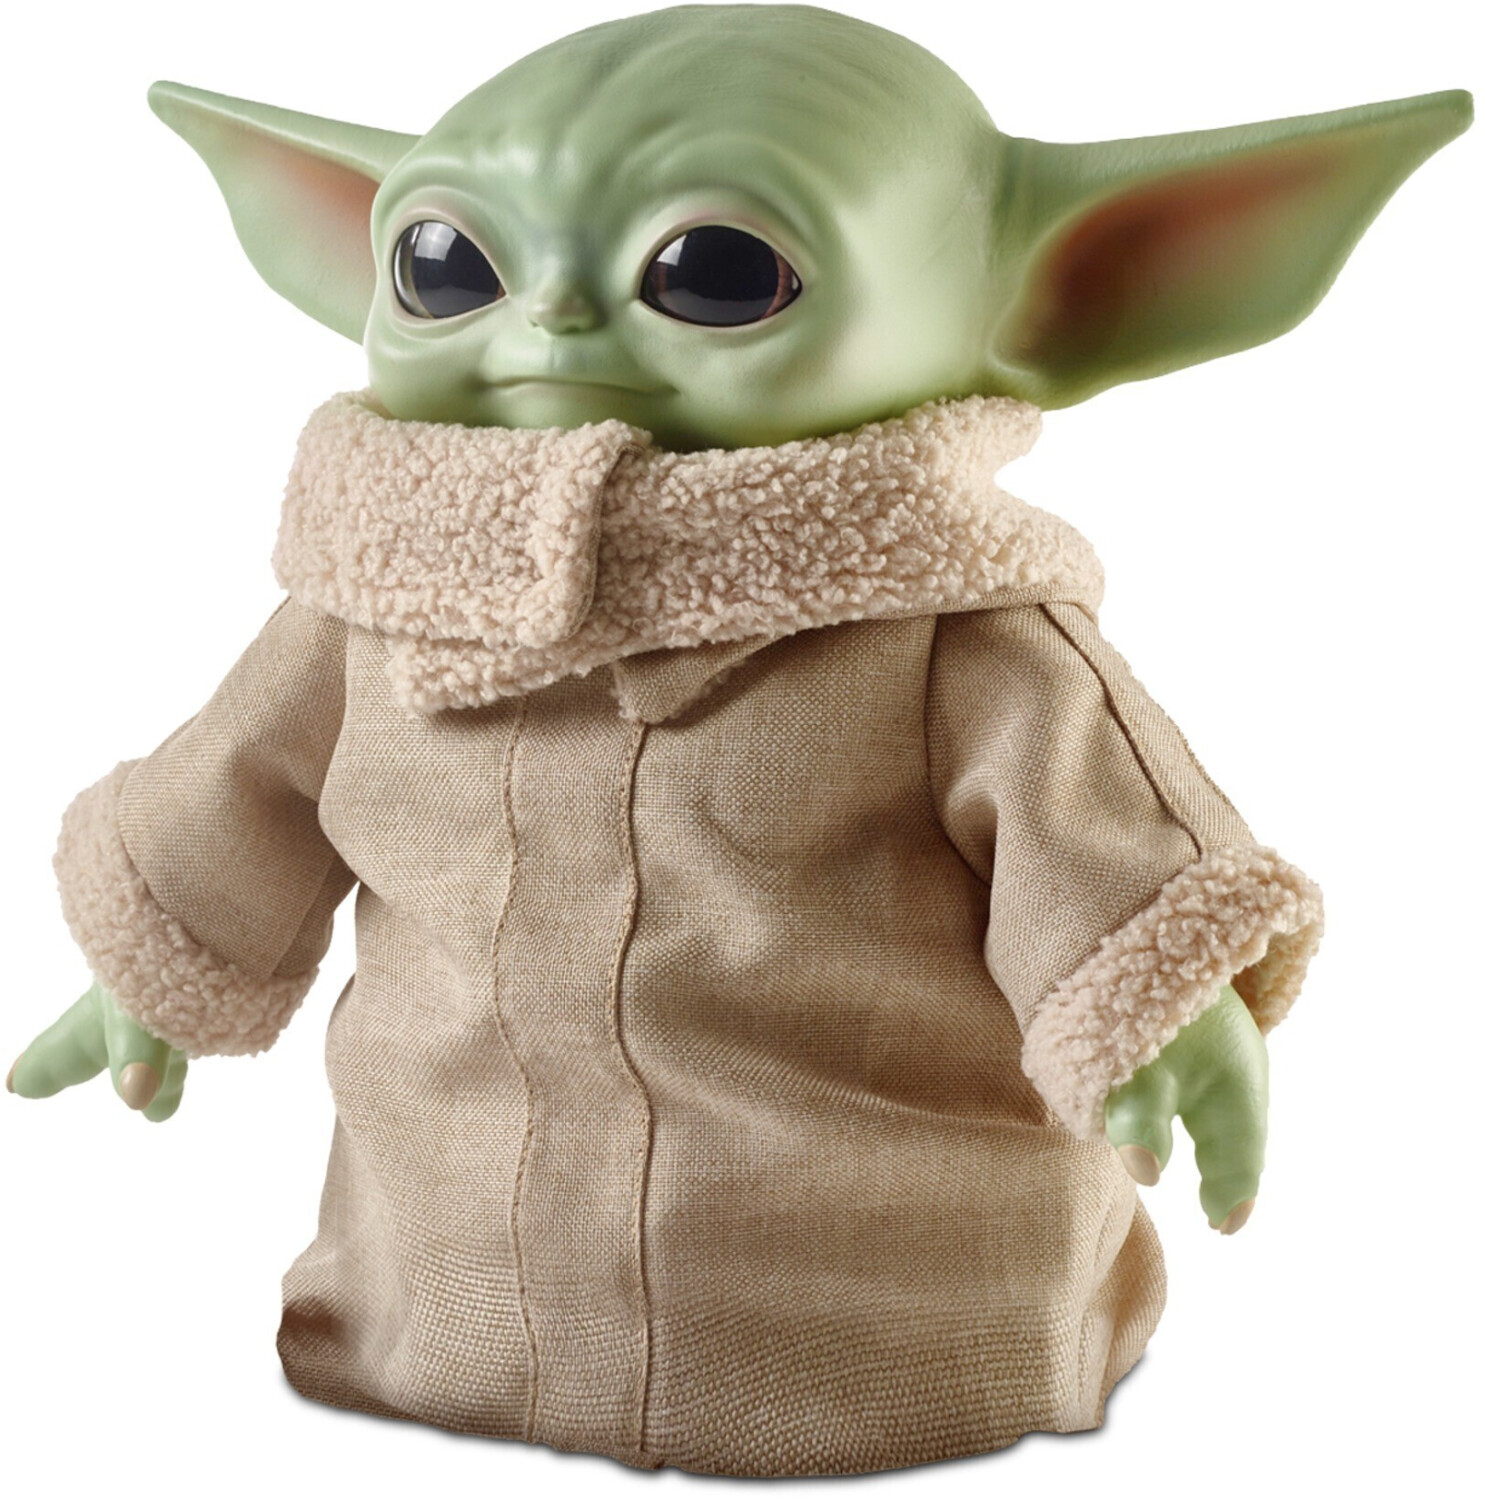 Buy Mattel Star Wars: The Mandalorian - The Child Yoda 28cm from £14.99  (Today) – Best Deals on